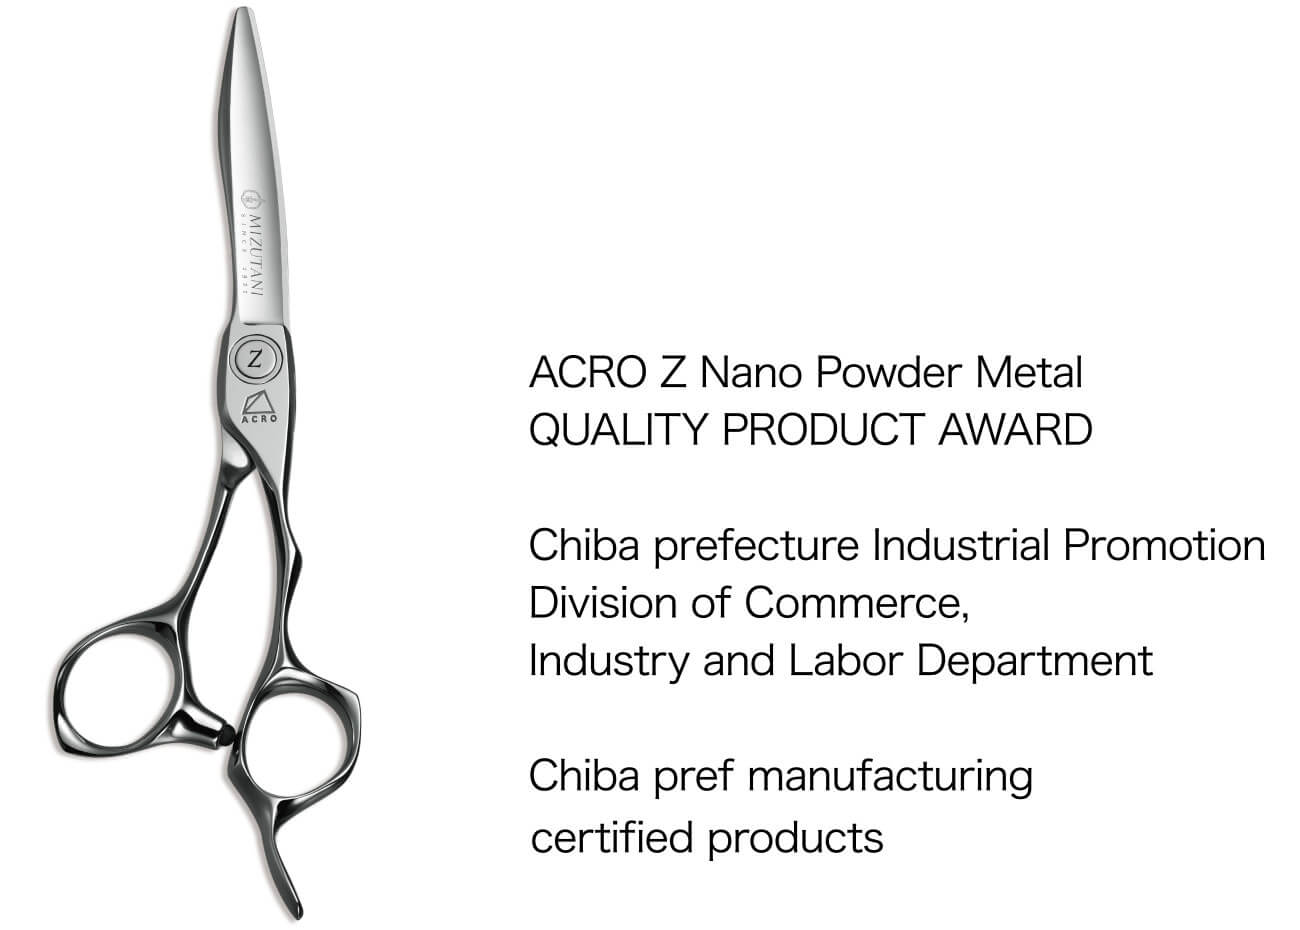 ACRO Z Nano Powder Metal QUALITY PRODUCT AWARD / Chiba prefecture Industrial Promotion Division of Commerce, Industry and Labor Department / Chiba pref manufacturing certified products